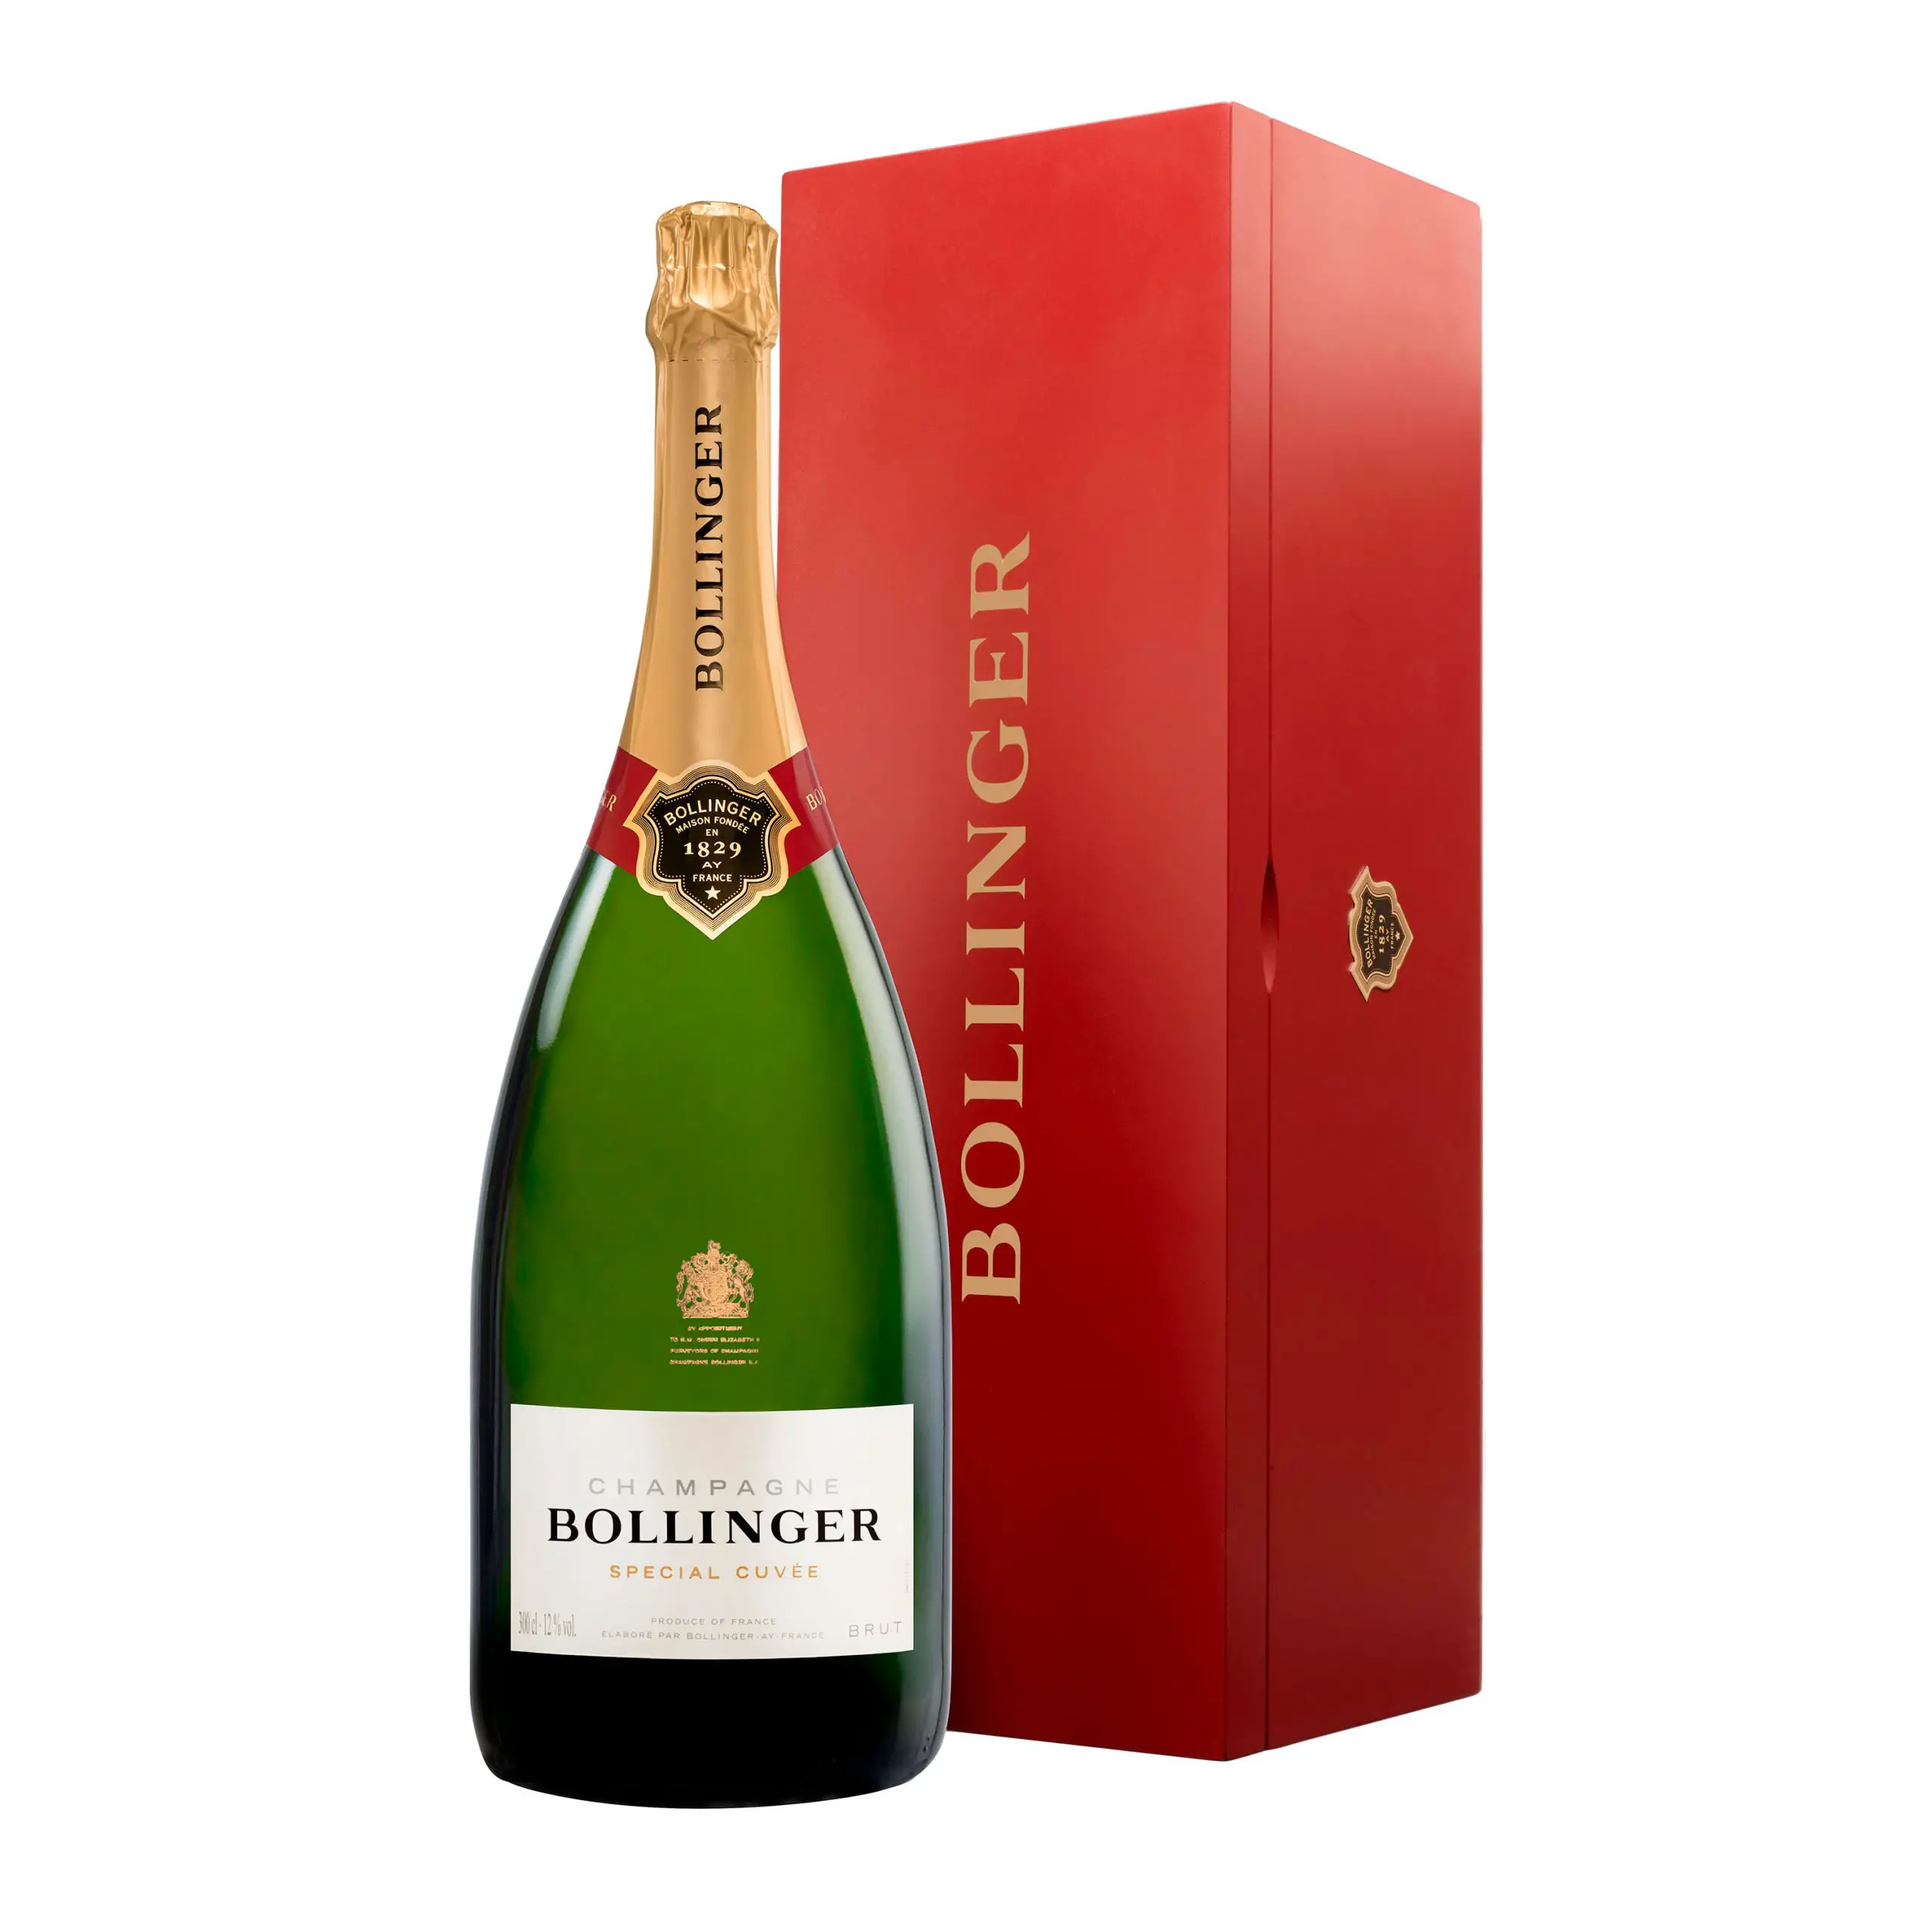 Buy a Jeroboam of Bollinger Special Cuvee NV Champagne 3 litres ...